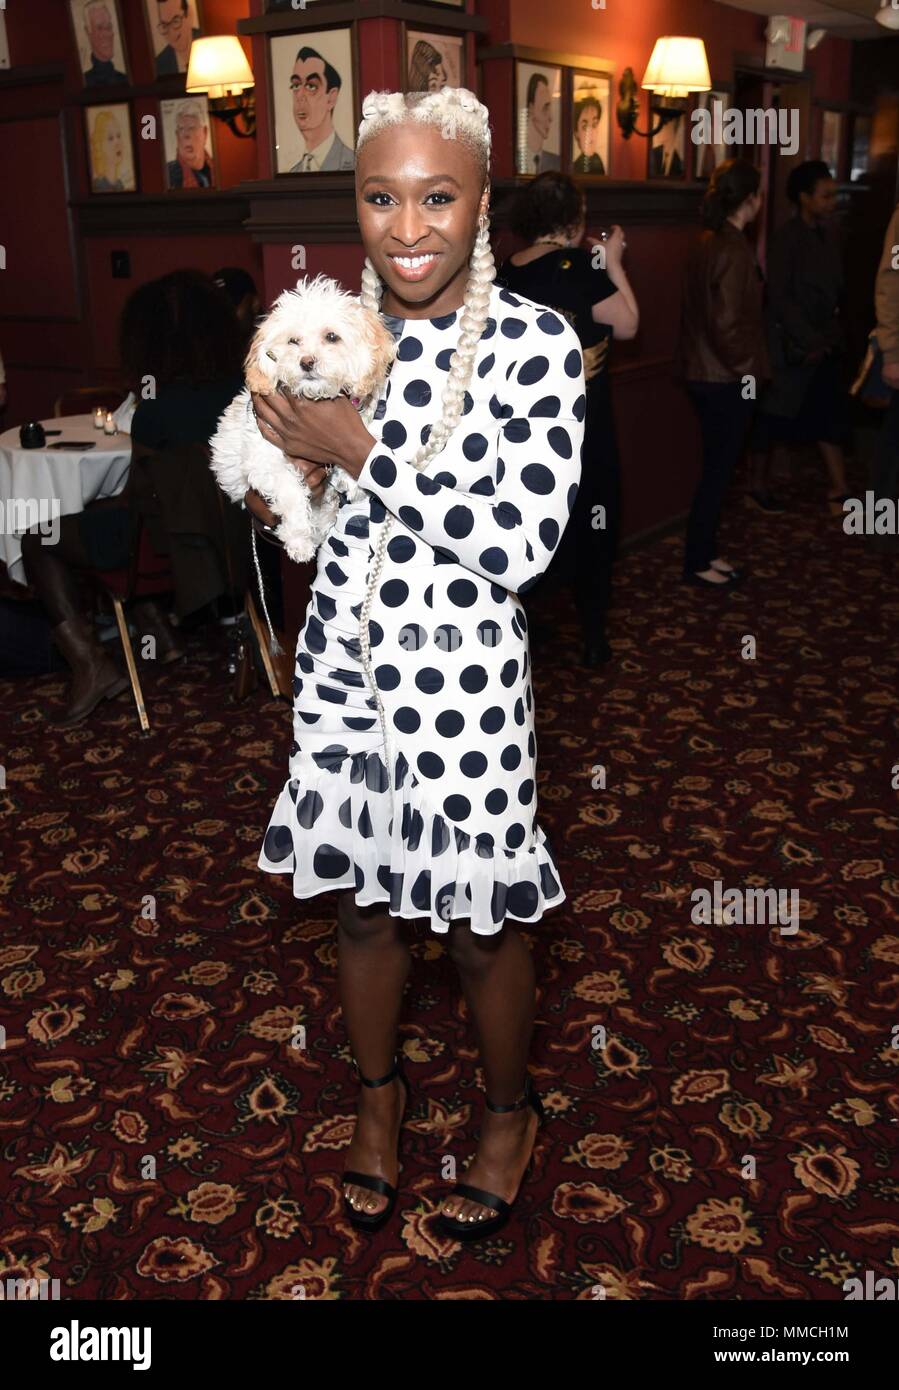 New York, YT, USA. 10th May, 2018. Cynthia Erivo, her dog Caleb at a public appearance for Condola Rashad Receives Her Portrait at Sardi's, Sardi's, New York, YT May 10, 2018. Credit: Derek Storm/Everett Collection/Alamy Live News Stock Photo